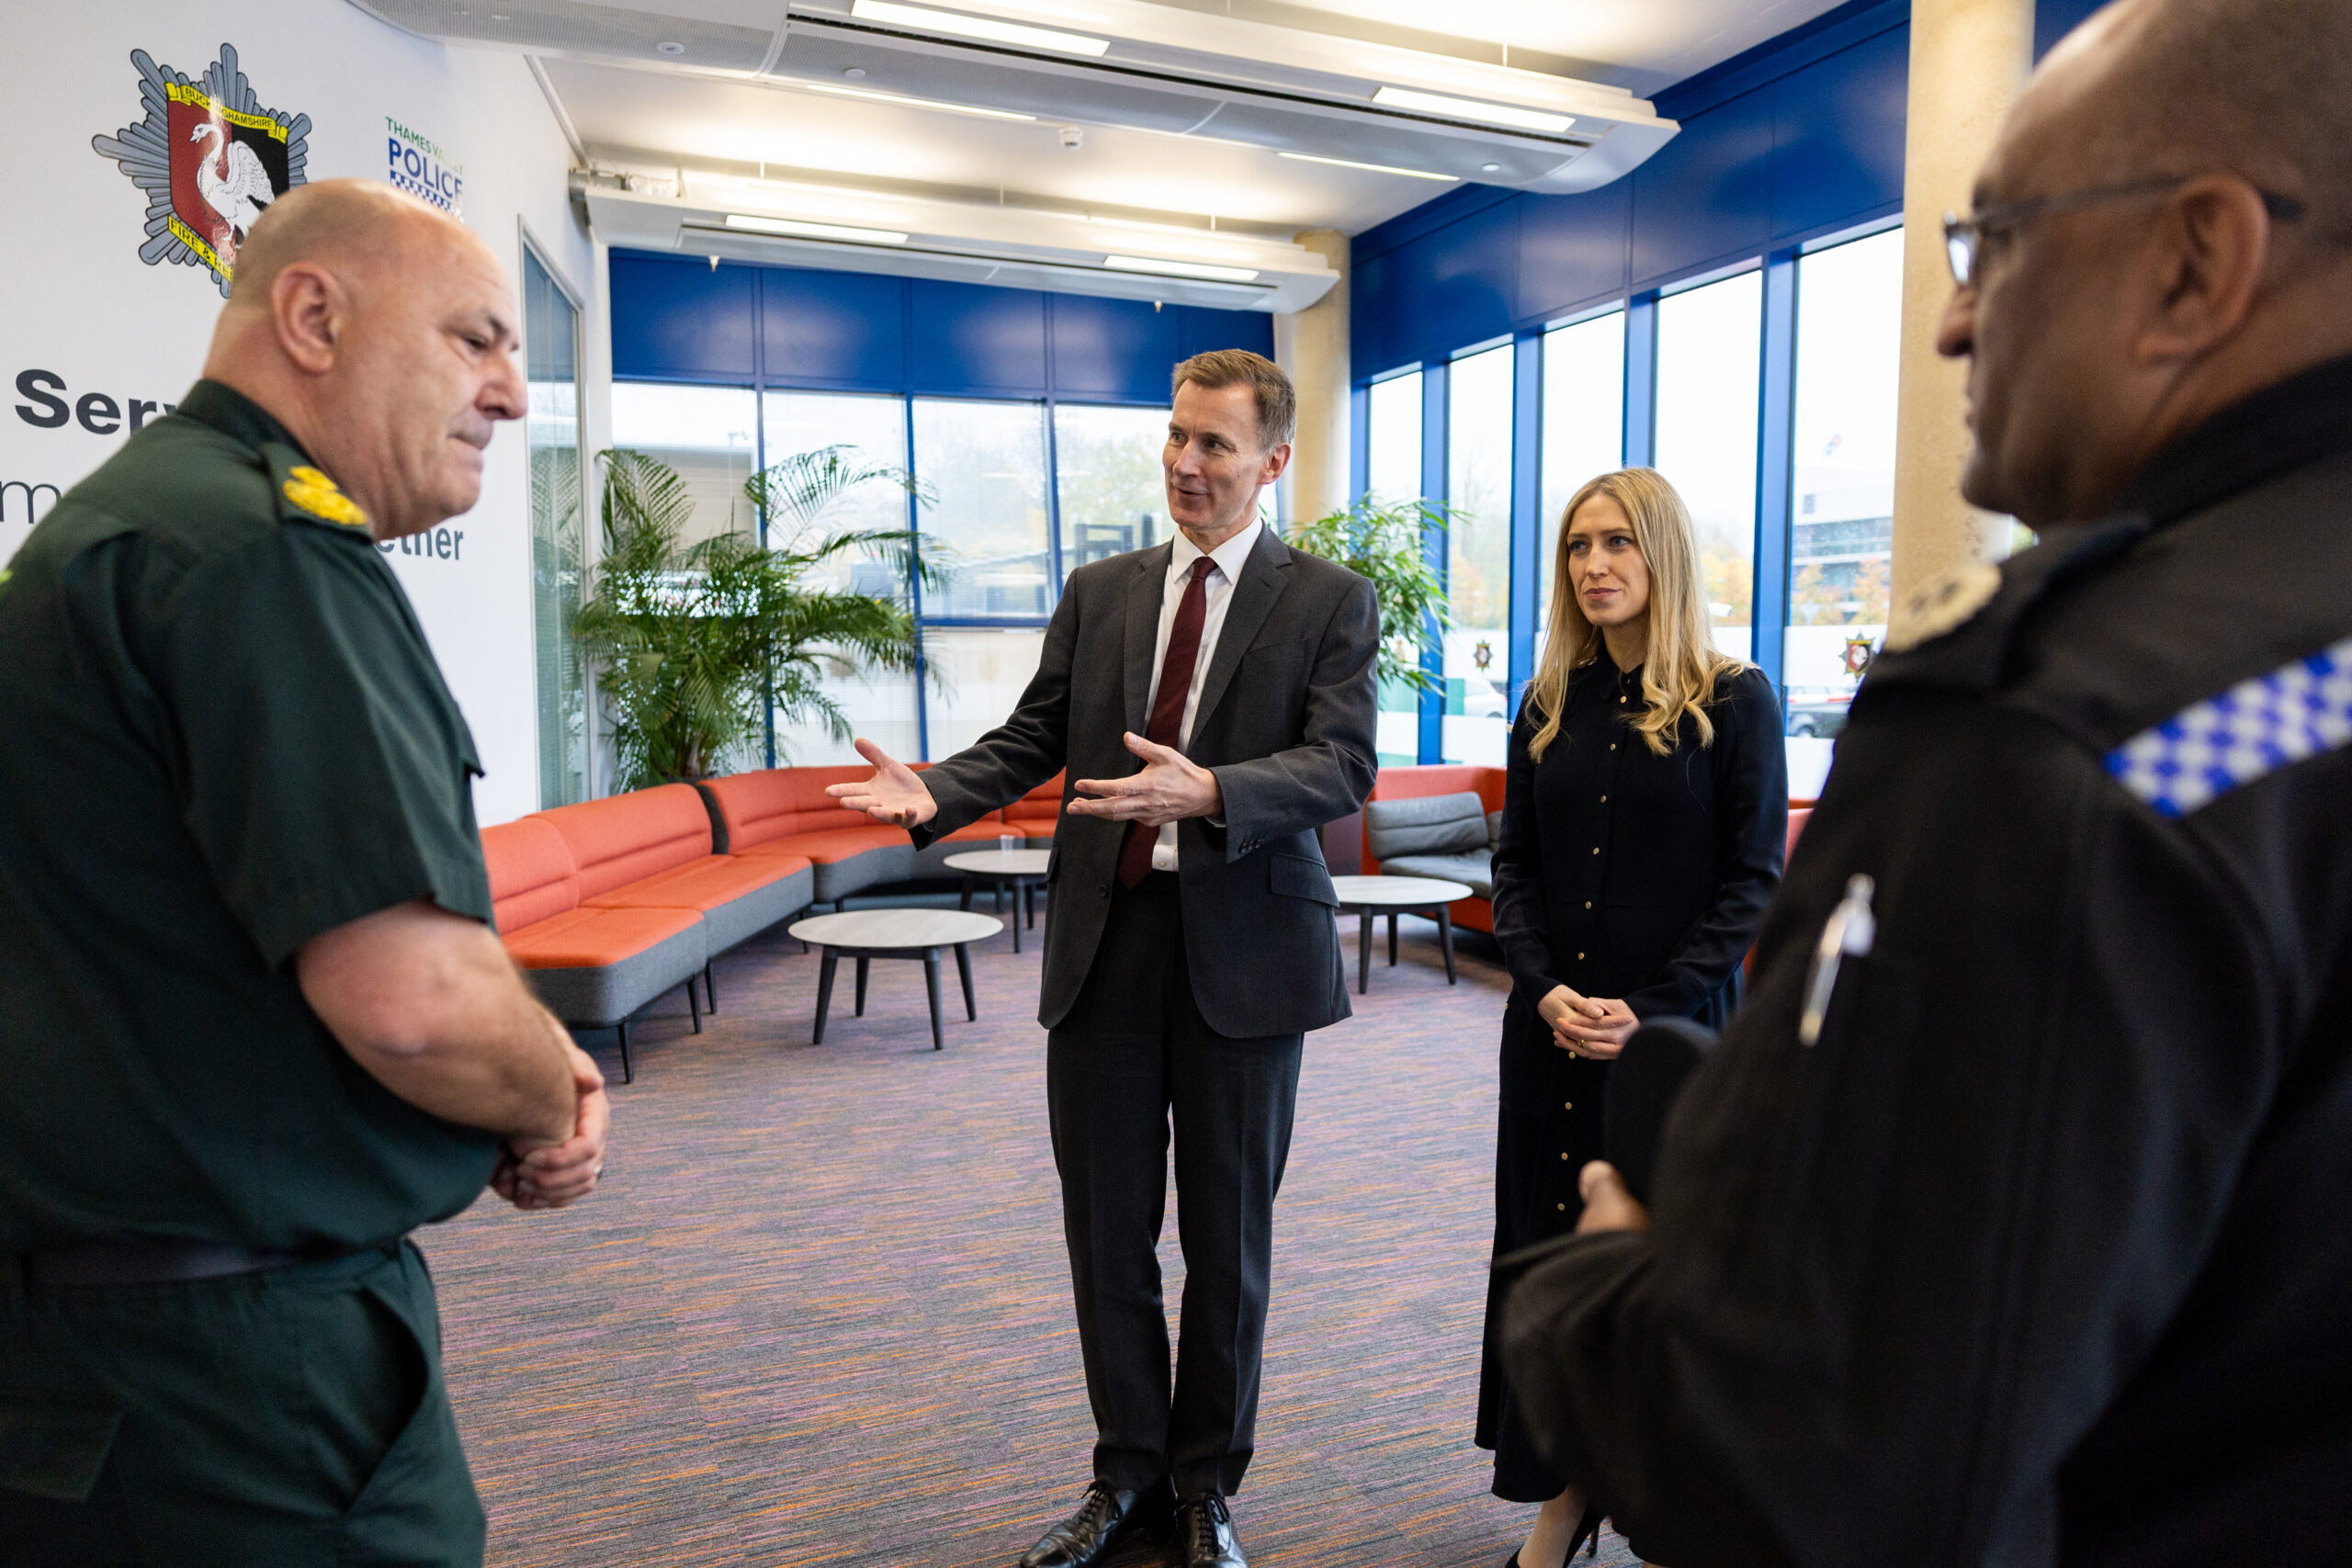 Chancellor Jeremy Hunt and Chief Secretary Laura Trott are greeted on arrival at the Blue Light Hub